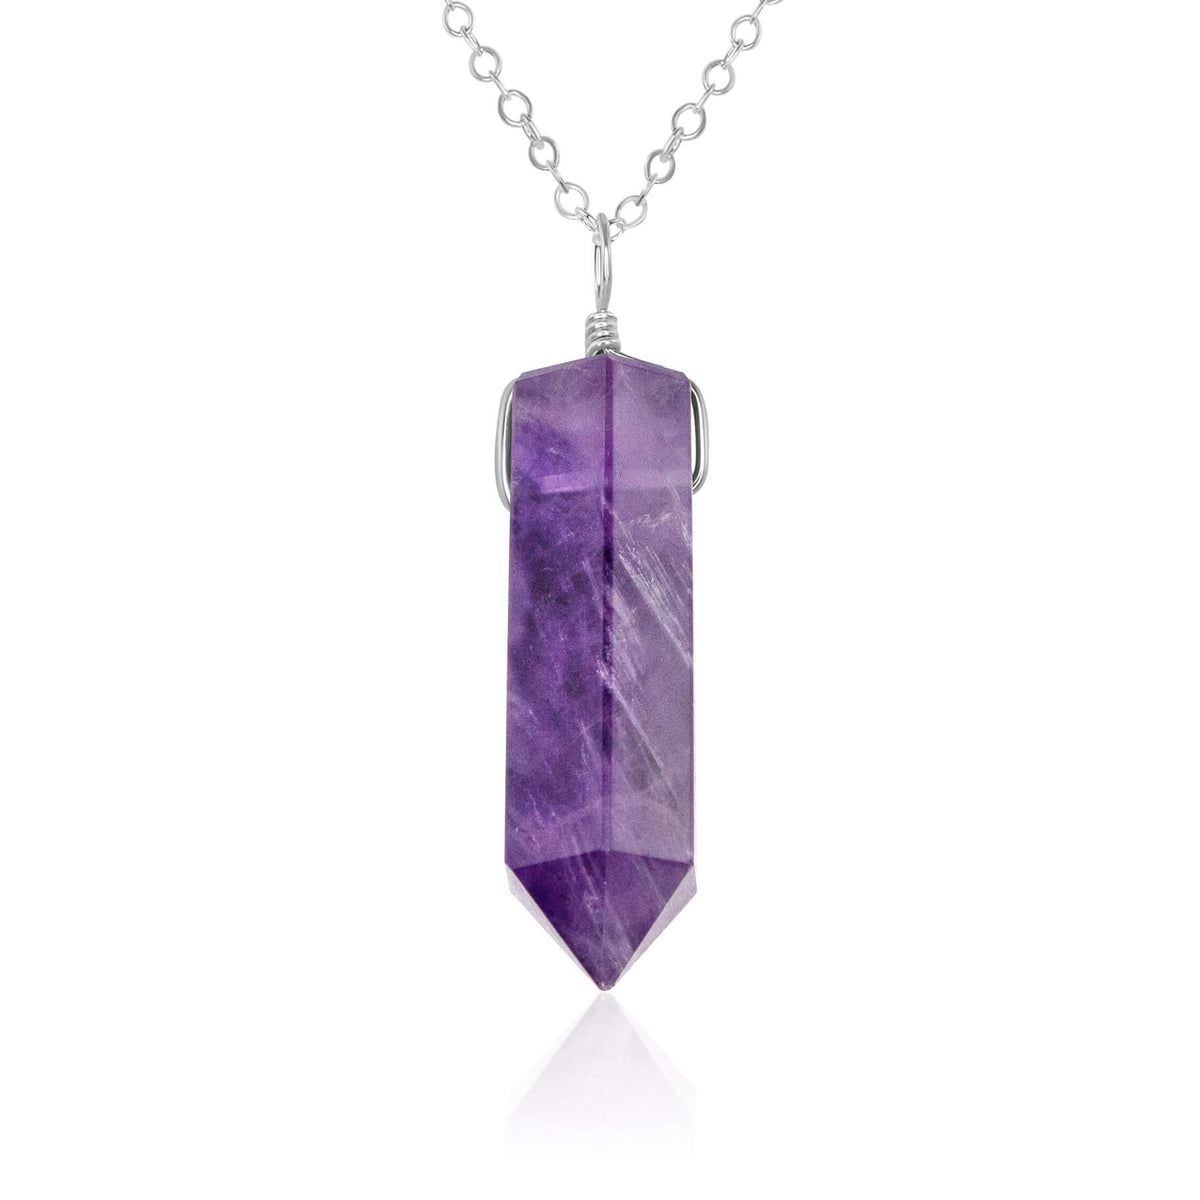 Large Crystal Point Necklace - Amethyst - Sterling Silver - Luna Tide Handmade Jewellery